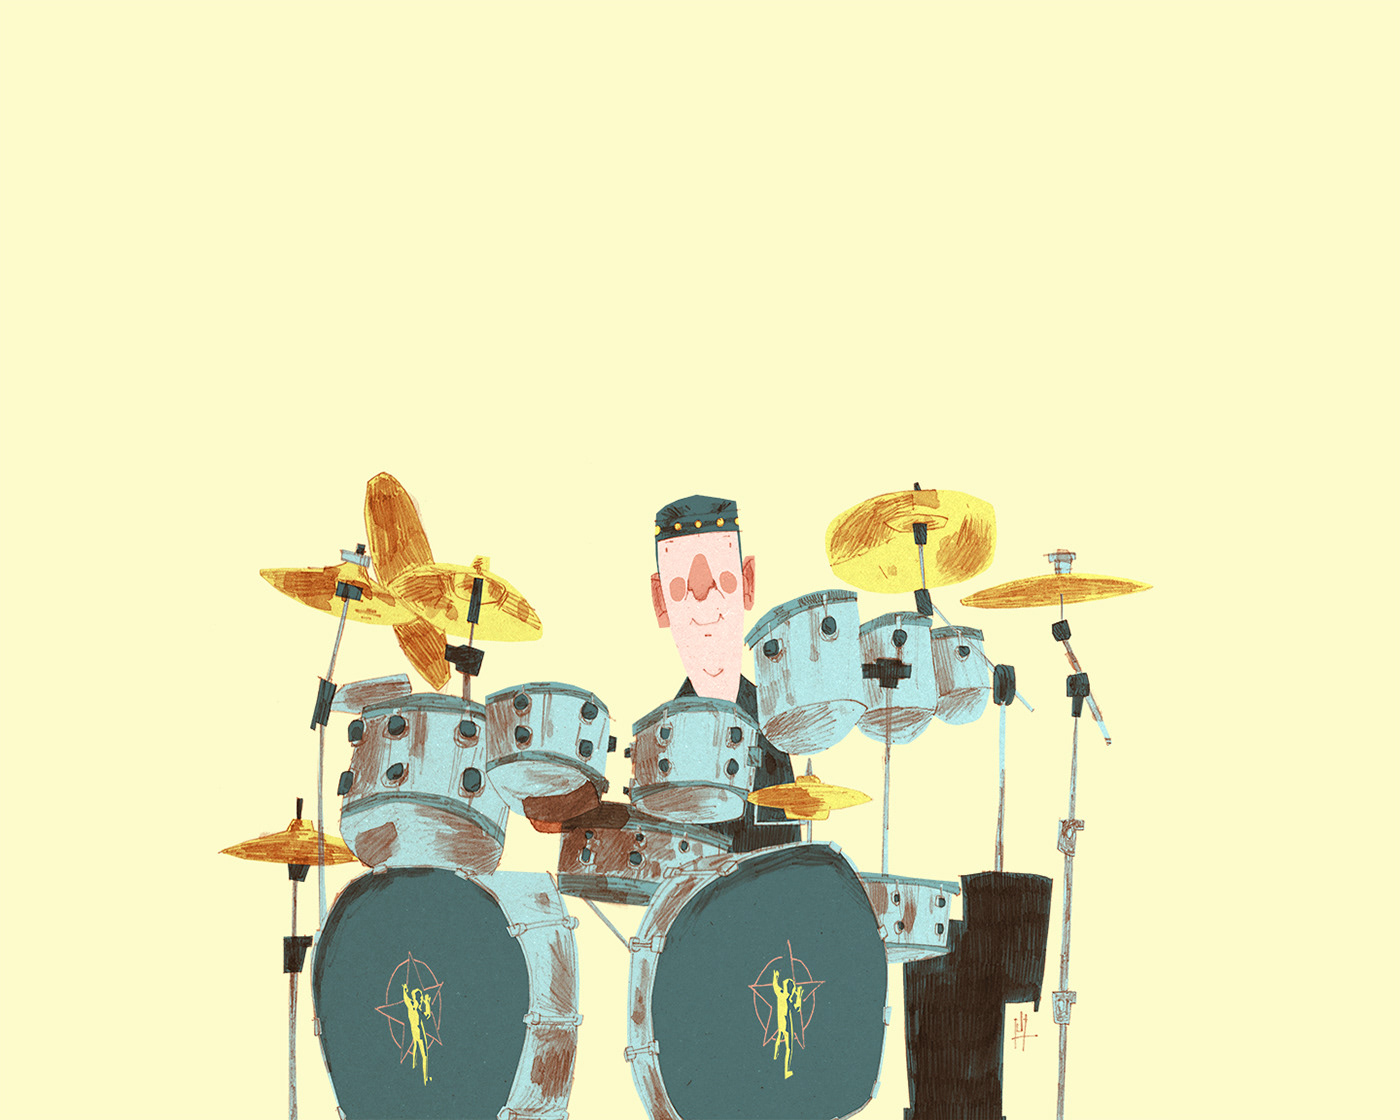 rush neil peart RIP Character music drums drummer 1970s rock portrait